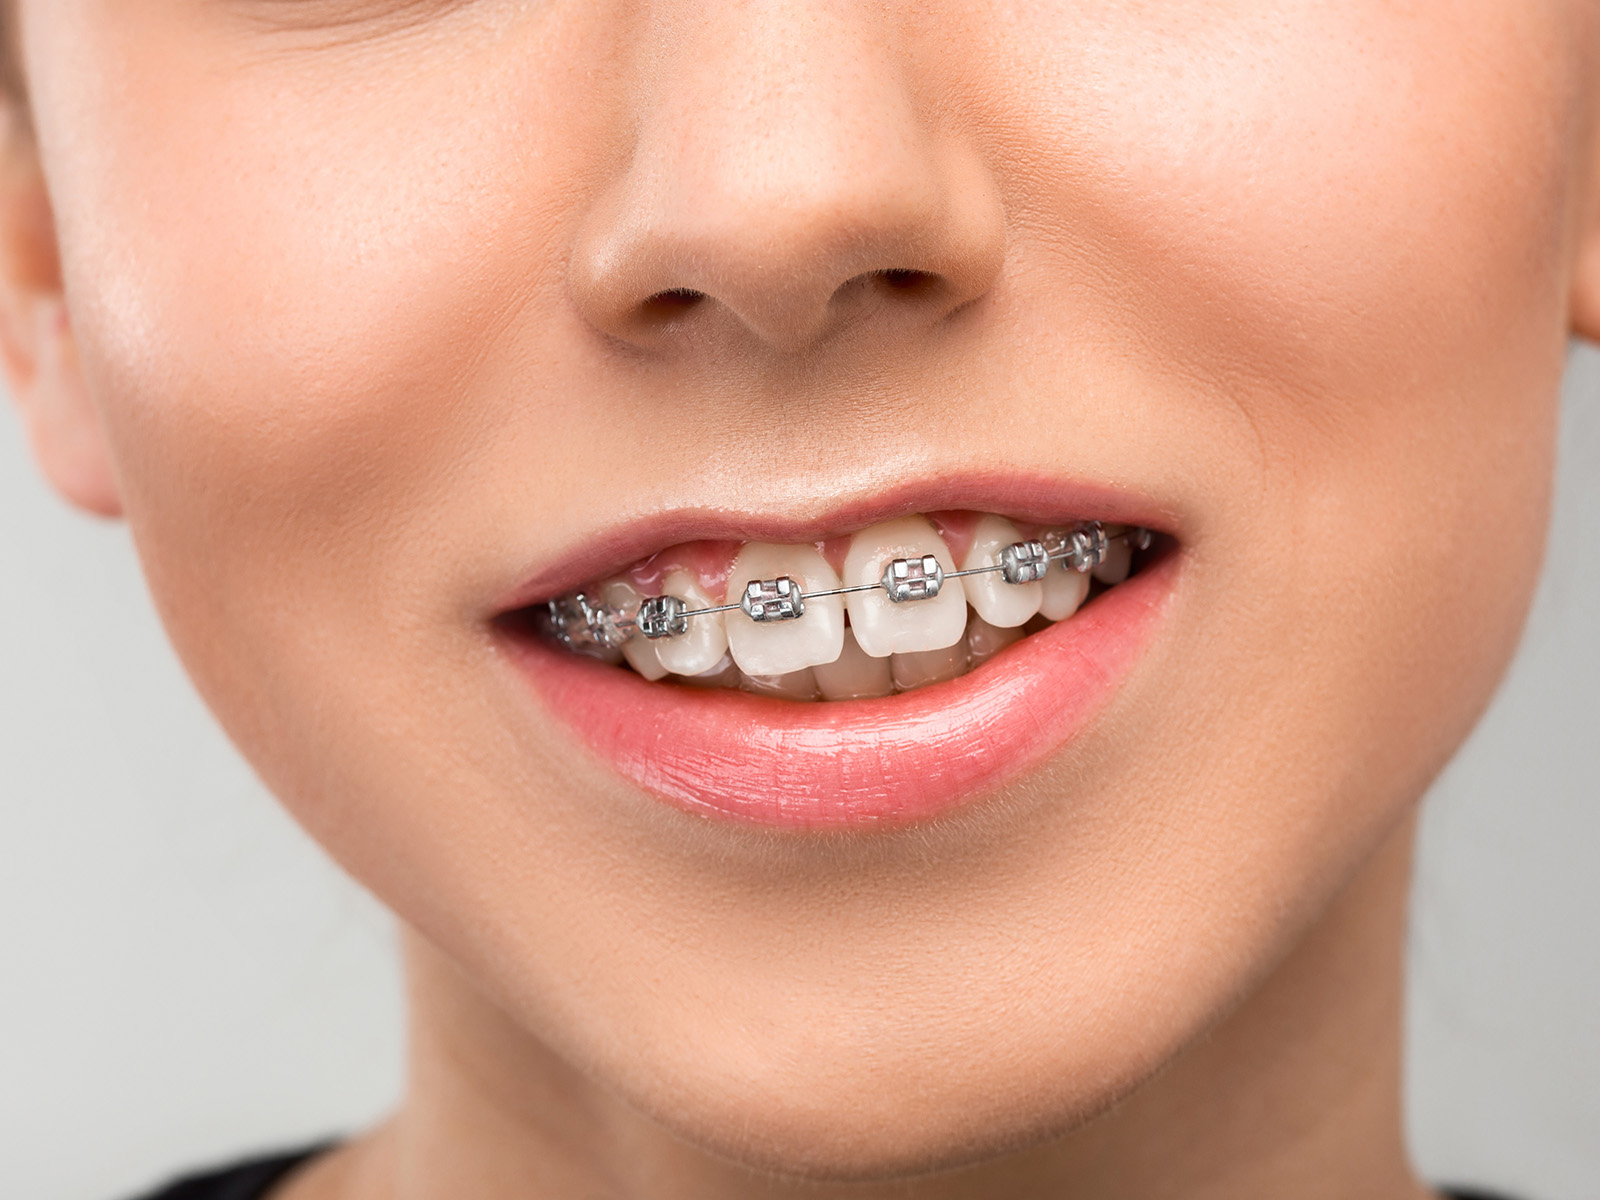 What Are Some Common Tips To Prevent Ceramic Braces From Staining?